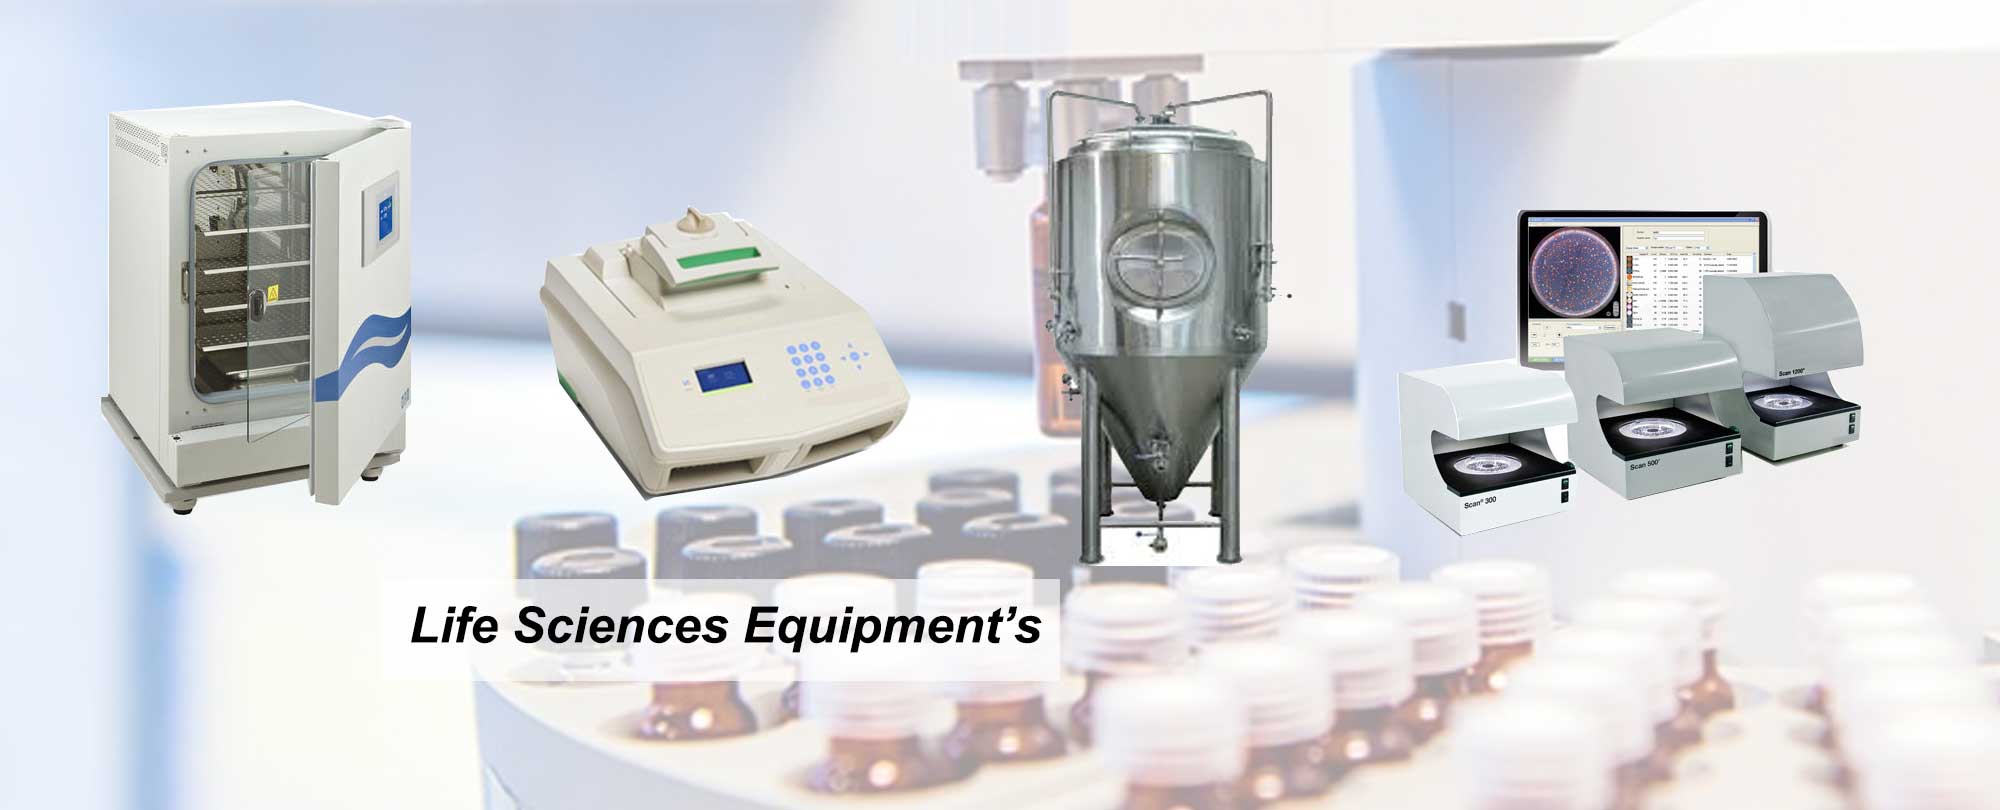 CHEMSPIRIT INSTRUMENTS & TECHNOLOGIES PRIVATE LIMITED